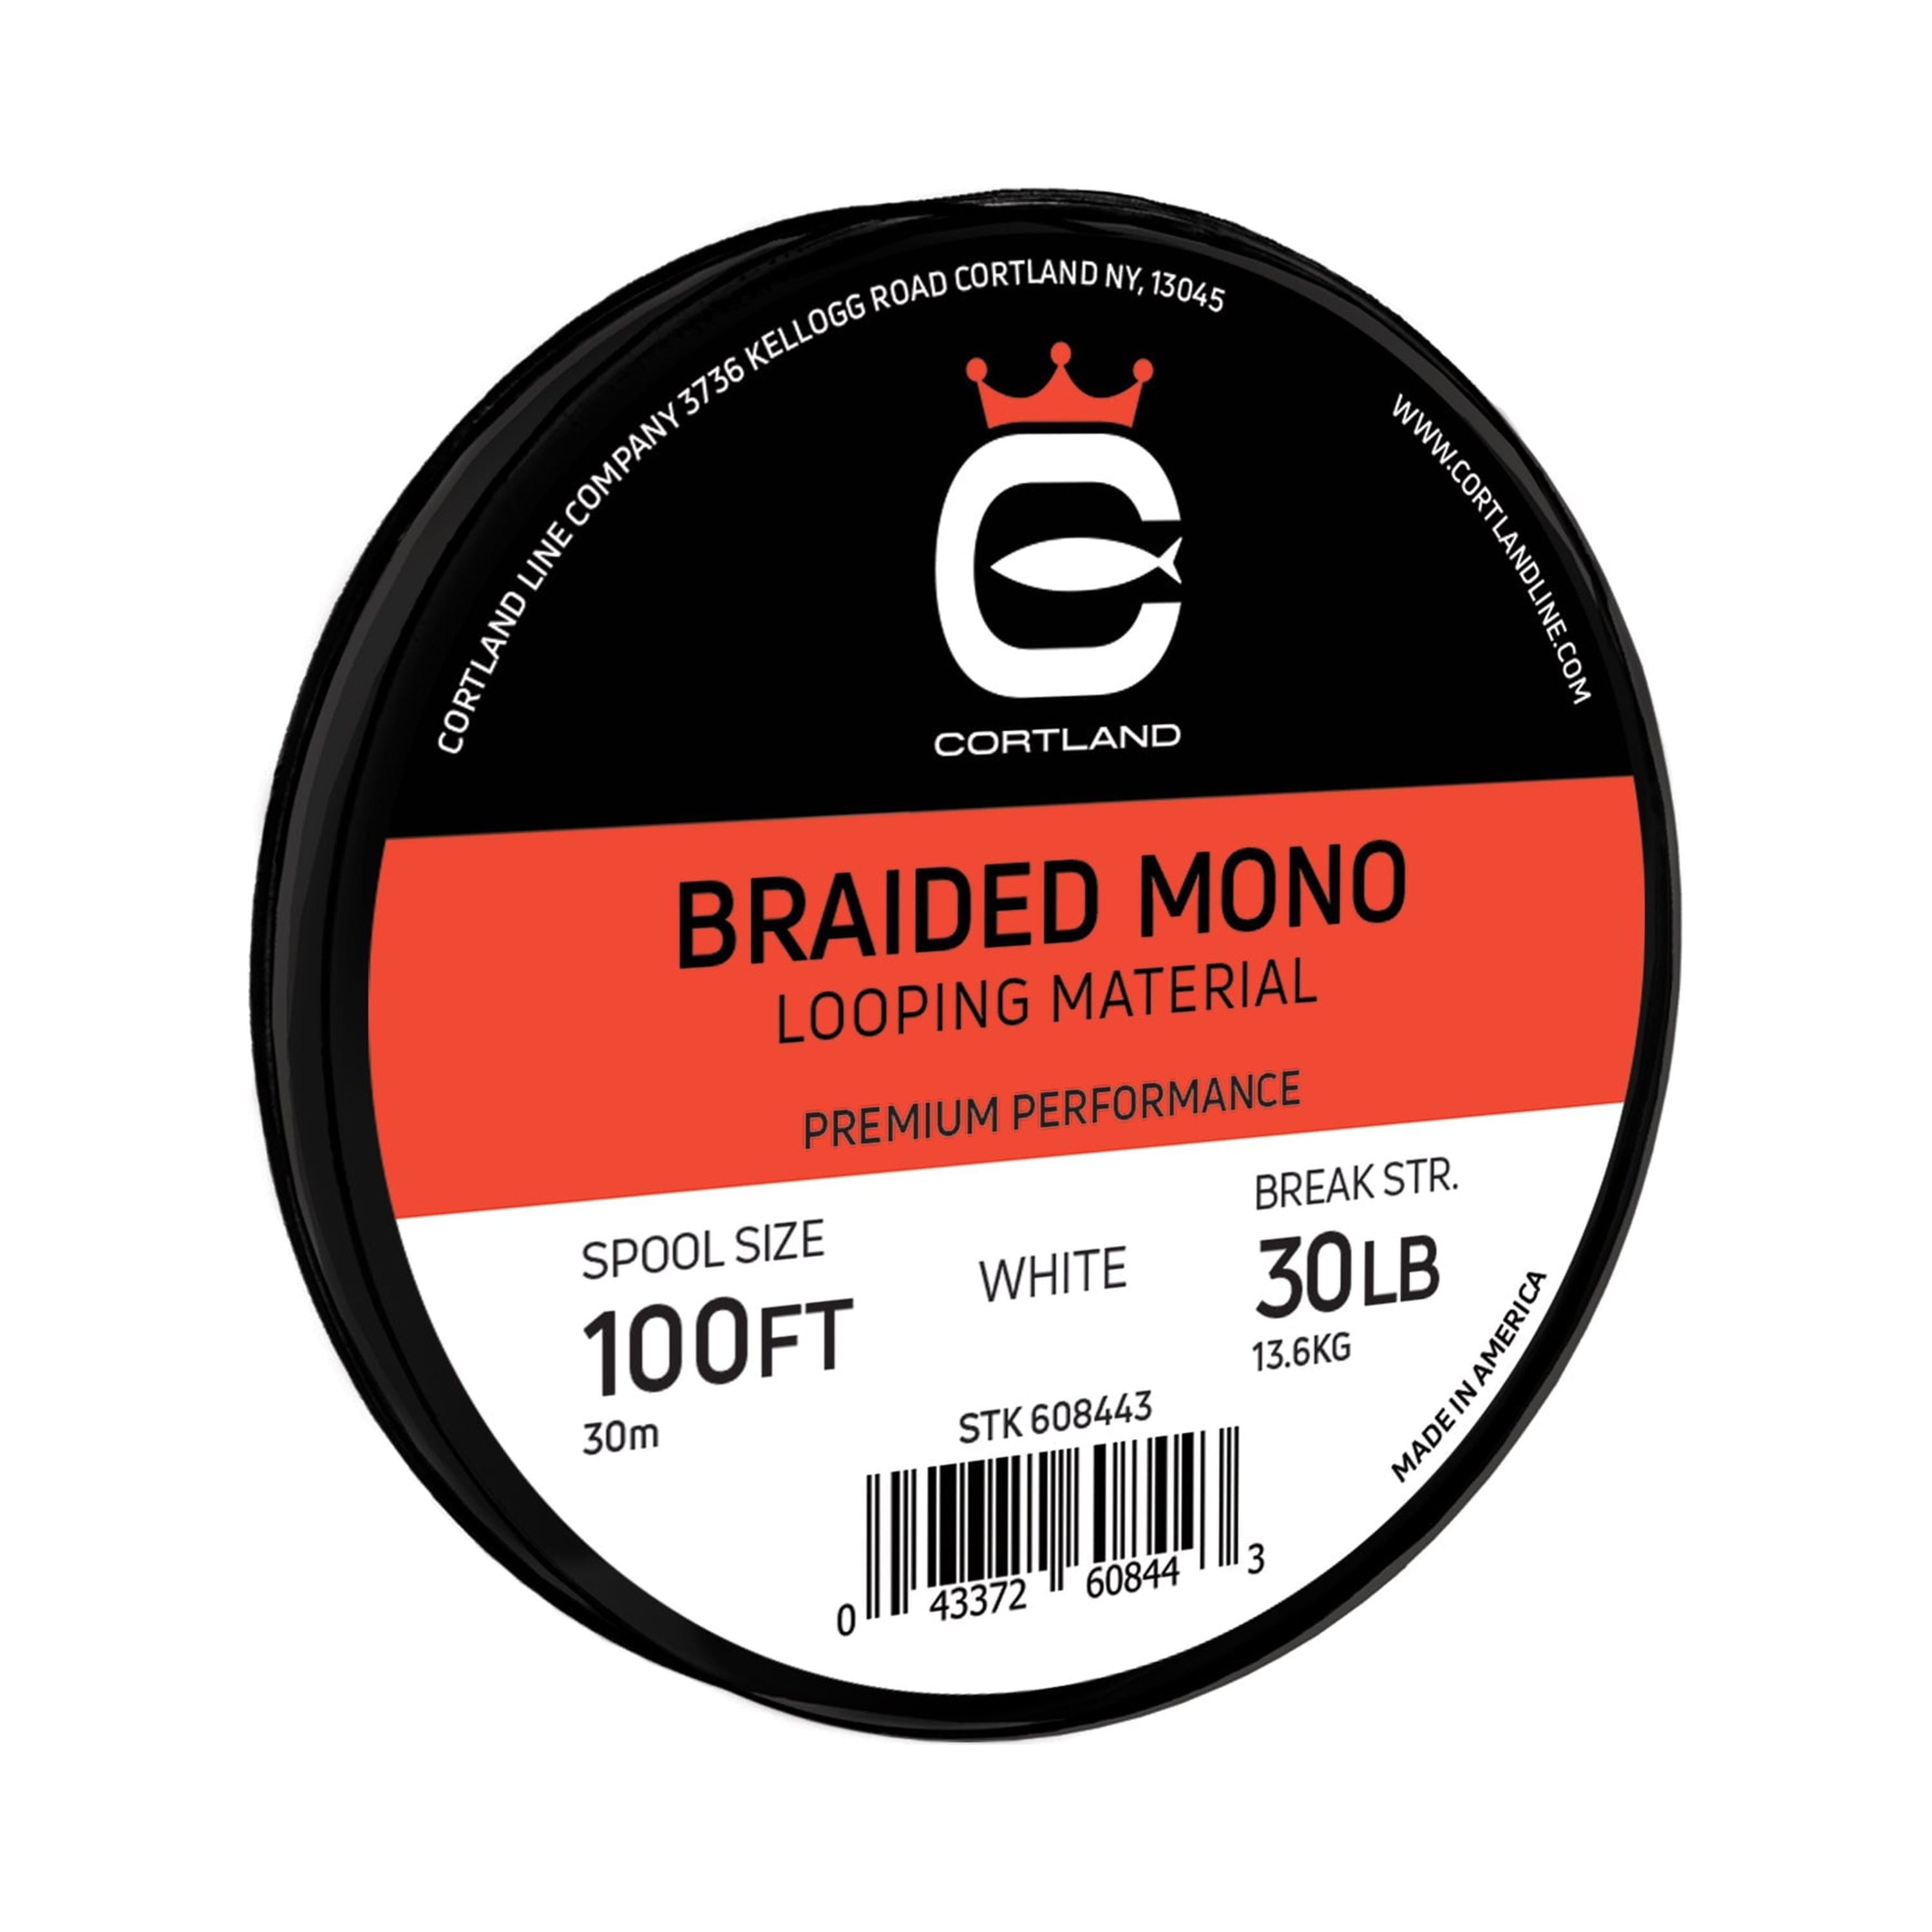 Braided Mono Looping Material 